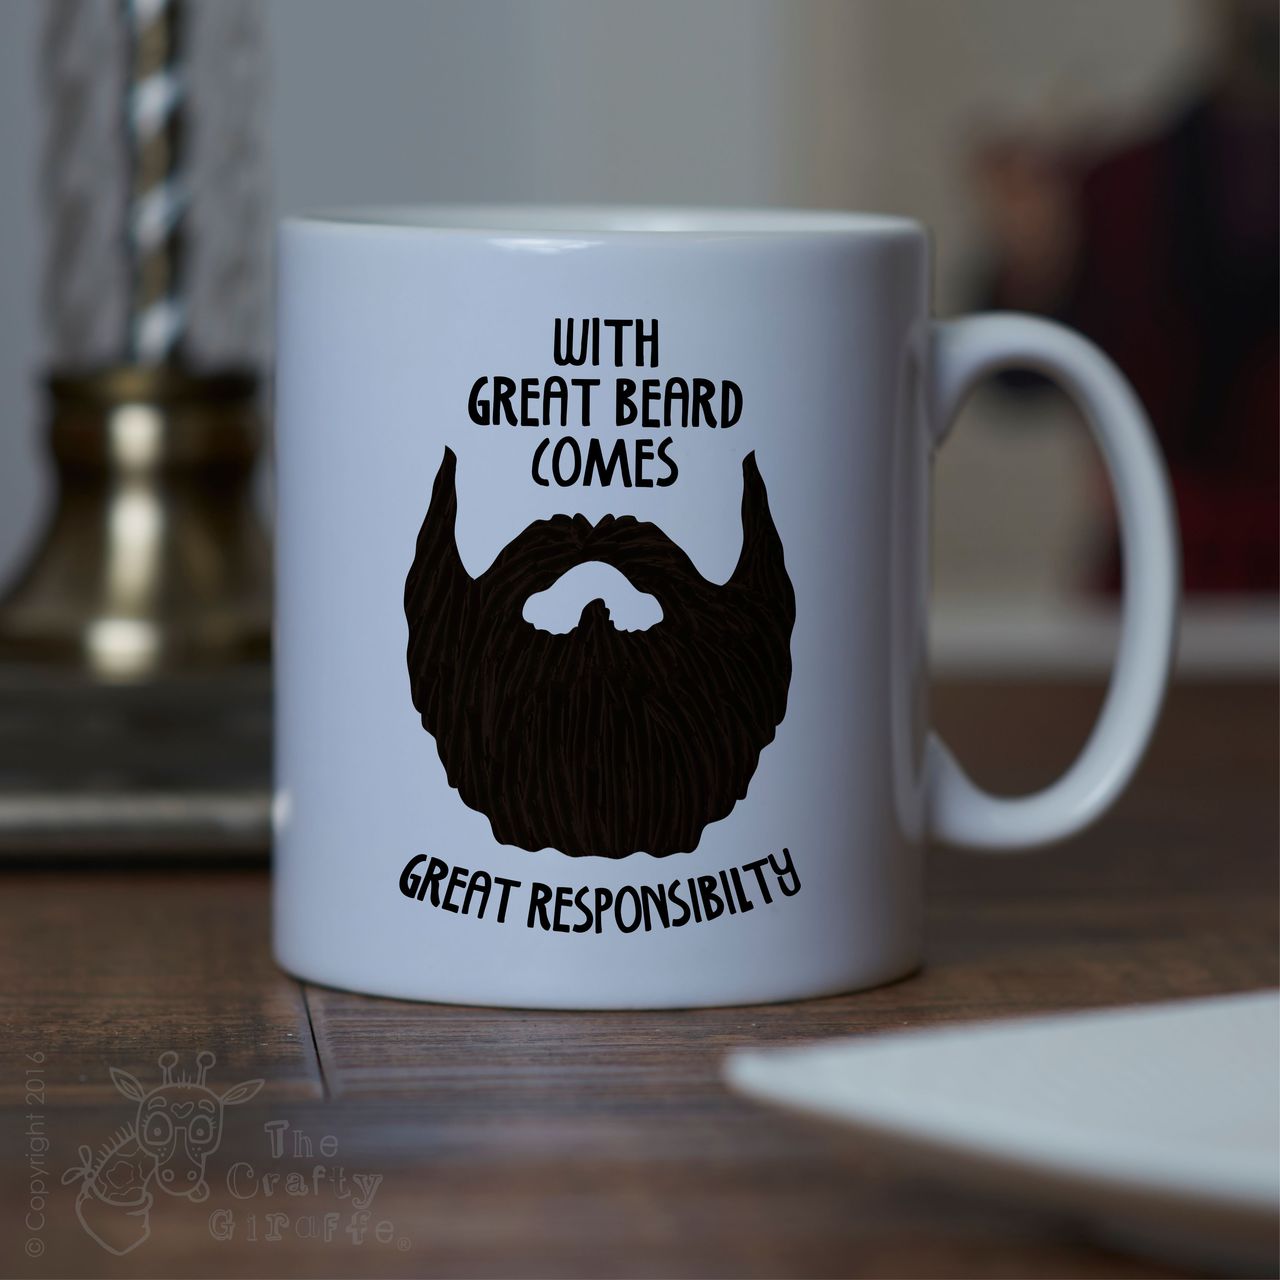 With great beard comes great responsibility Mug – Black